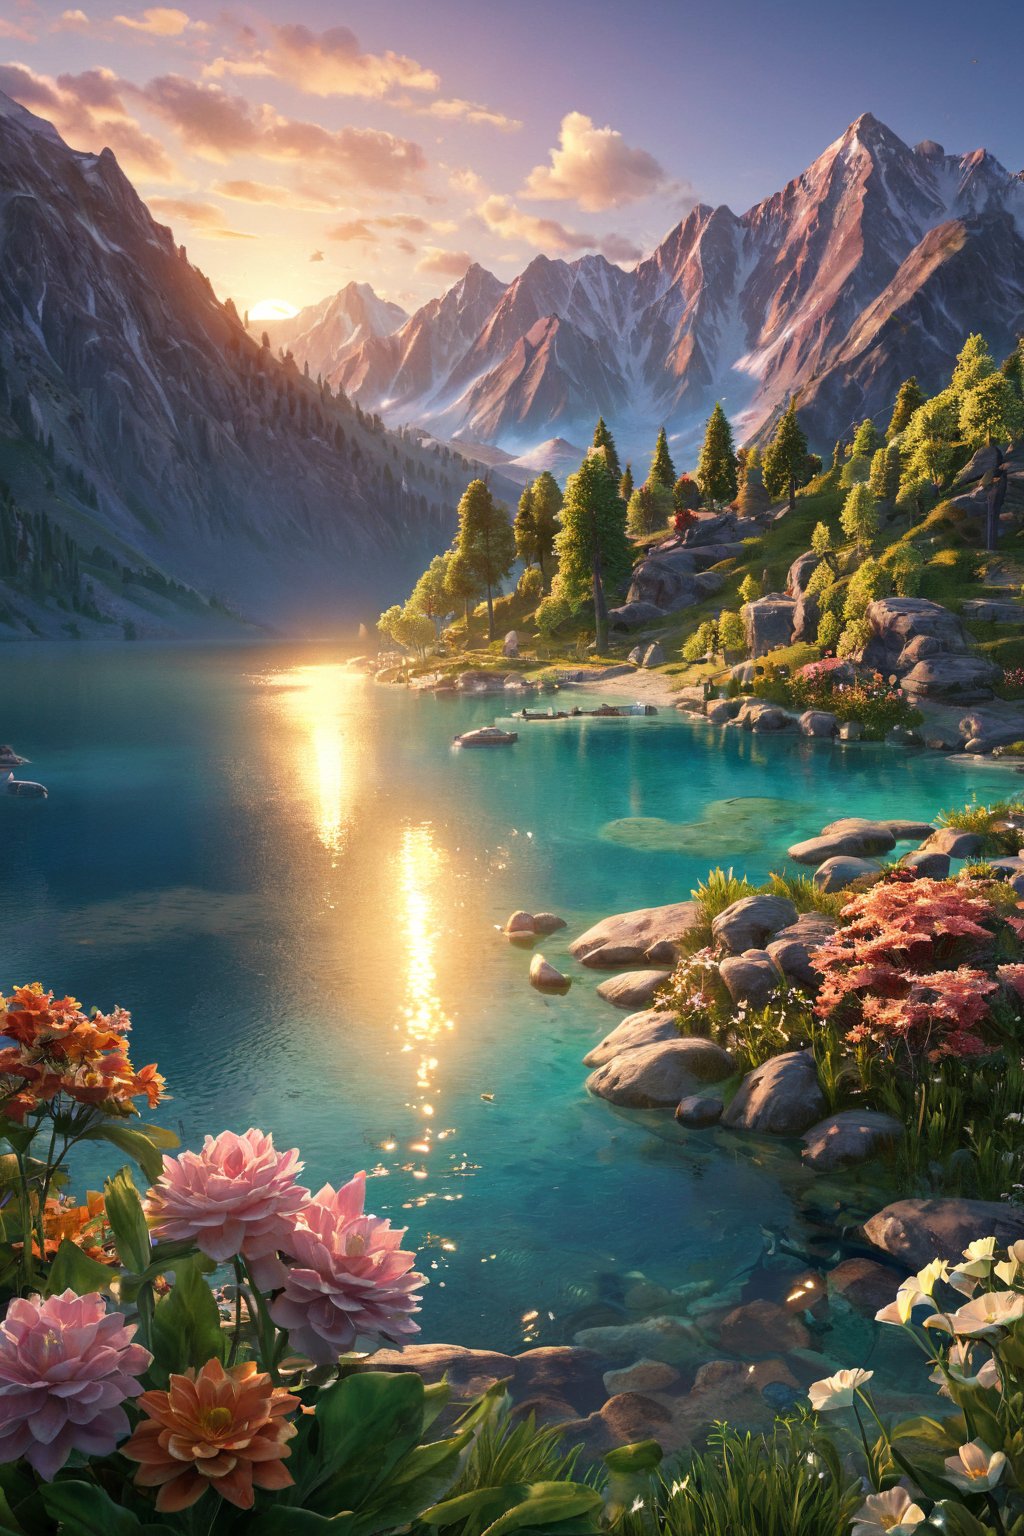 A visually stunning 3D creation, showcasing a breathtaking landscape with vibrant colors that burst from every element. The scene features an impressive mountain range, a serene lake with crystal-clear waters, and lush green forests that blend seamlessly into the sky. The sun casts a warm golden light over the scene, illuminating the flowers, trees, and water, creating an awe-inspiring, mesmerizing visual masterpiece.